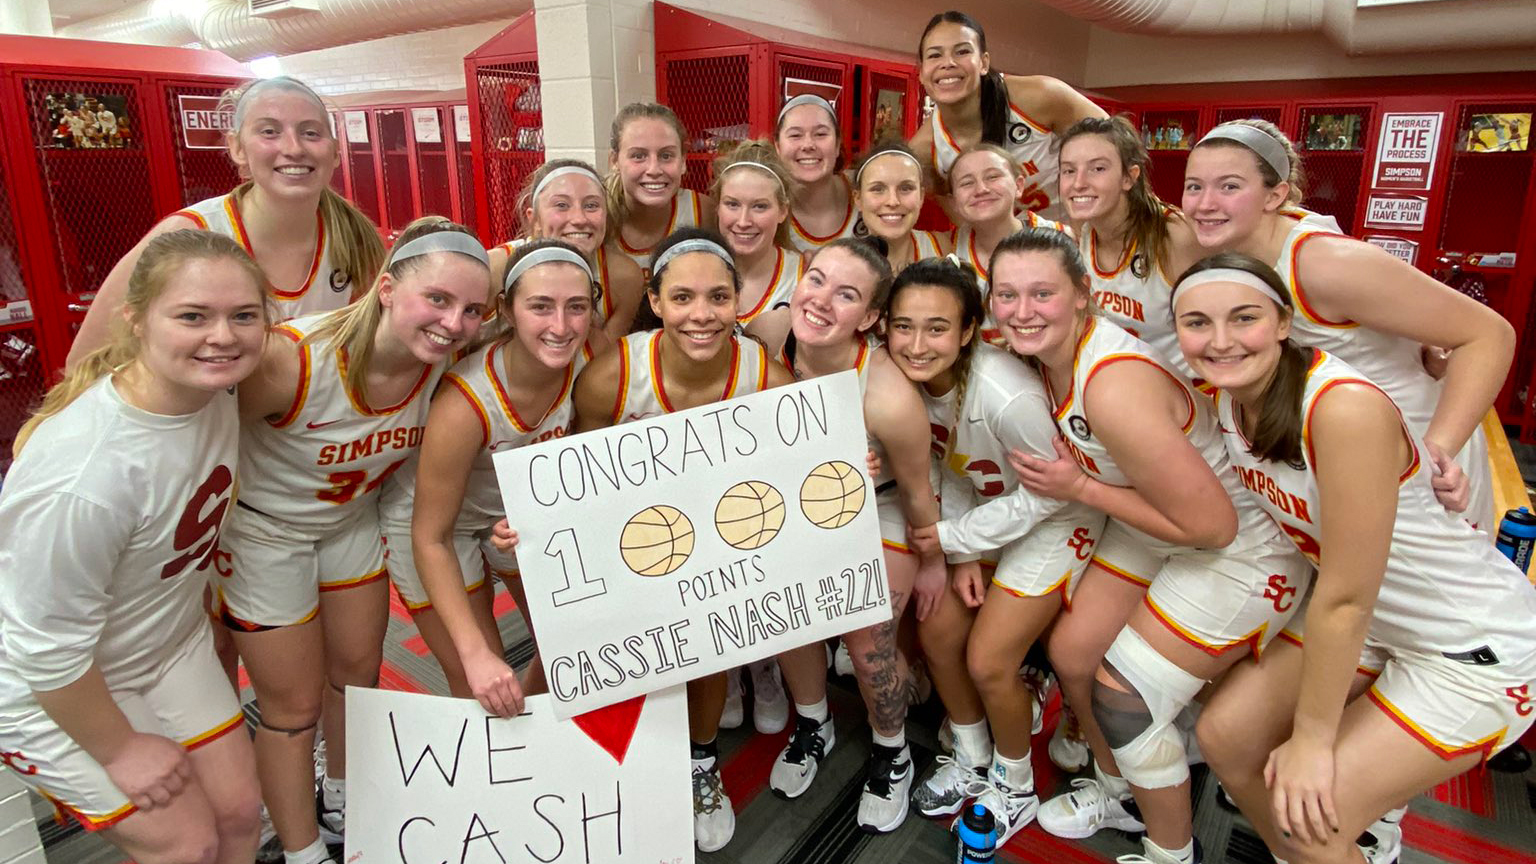 Senior Cassie Nash becomes the 19th member of Simpson's 1,000-point club